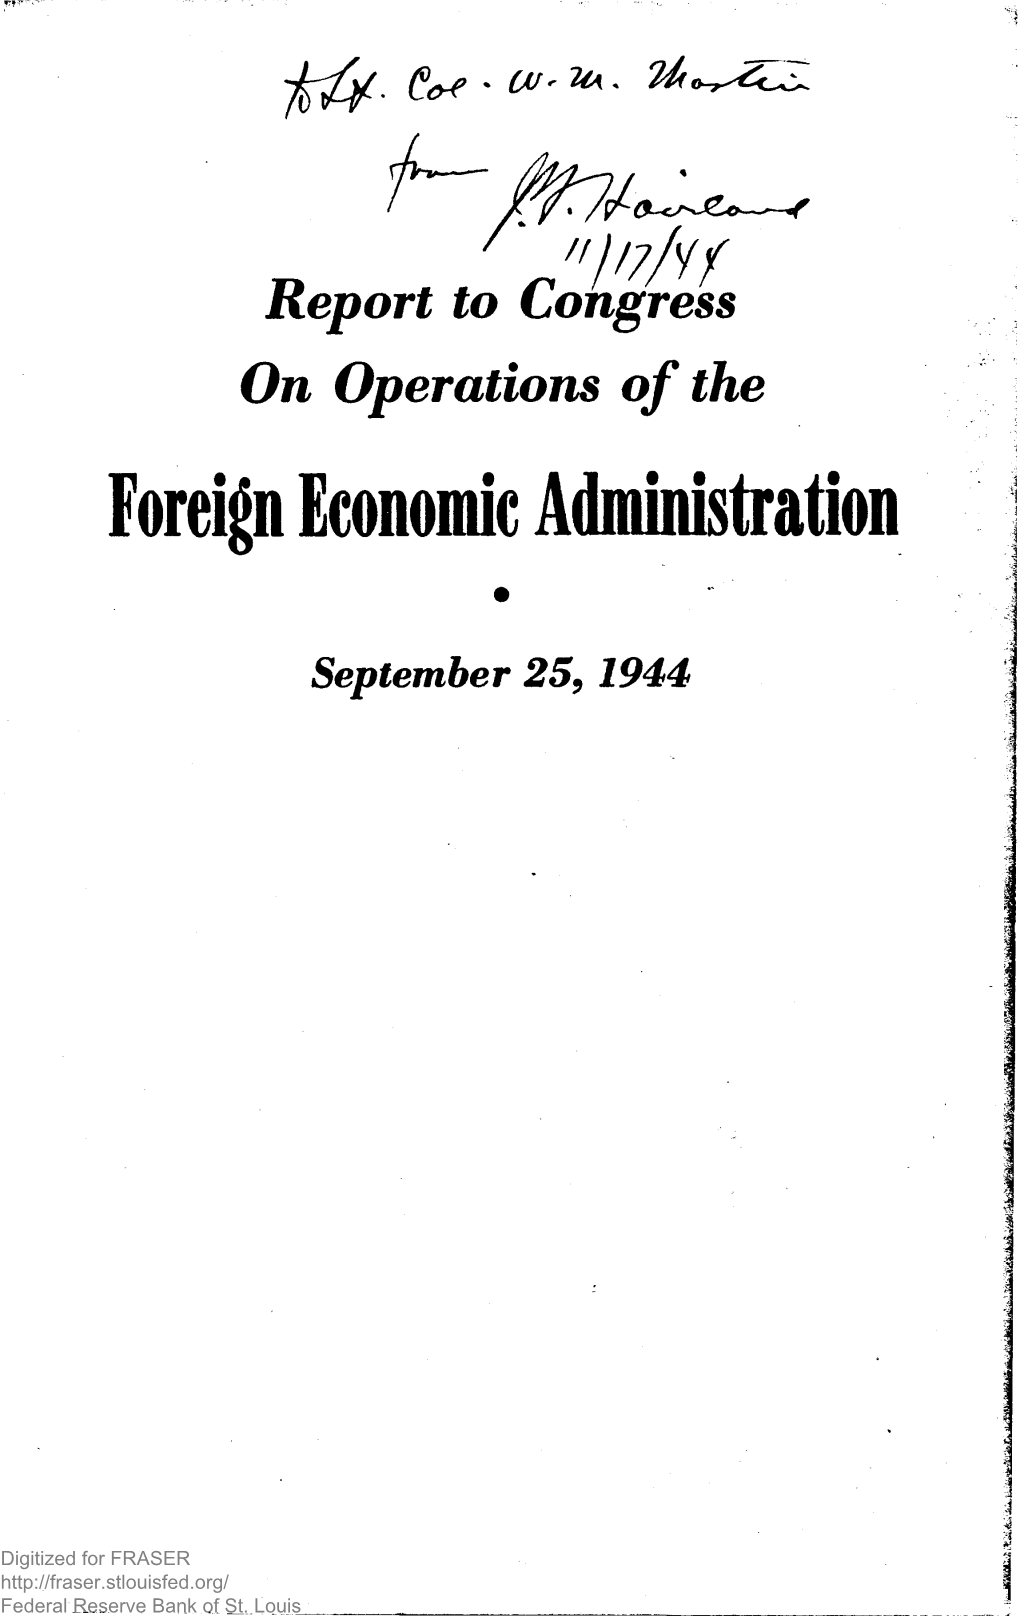 Report to Congress on Operations of the Foreign Economic Administration